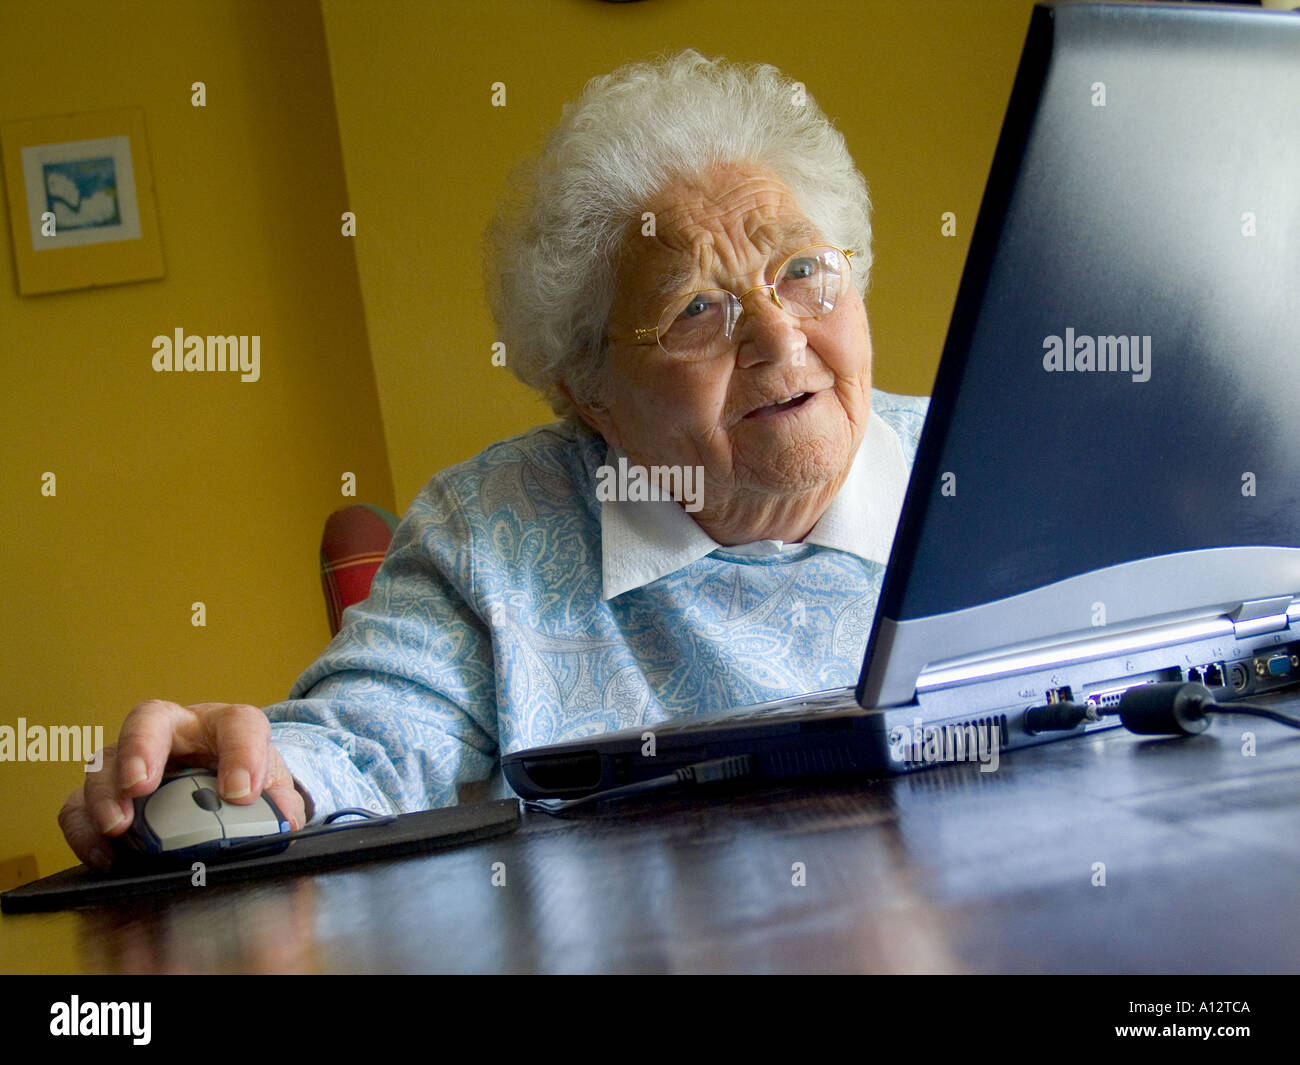 Senior elderly lady & computer at home using her new technology, is fascinated by her laptop computer screen and learning its possibilities. Stock Photo